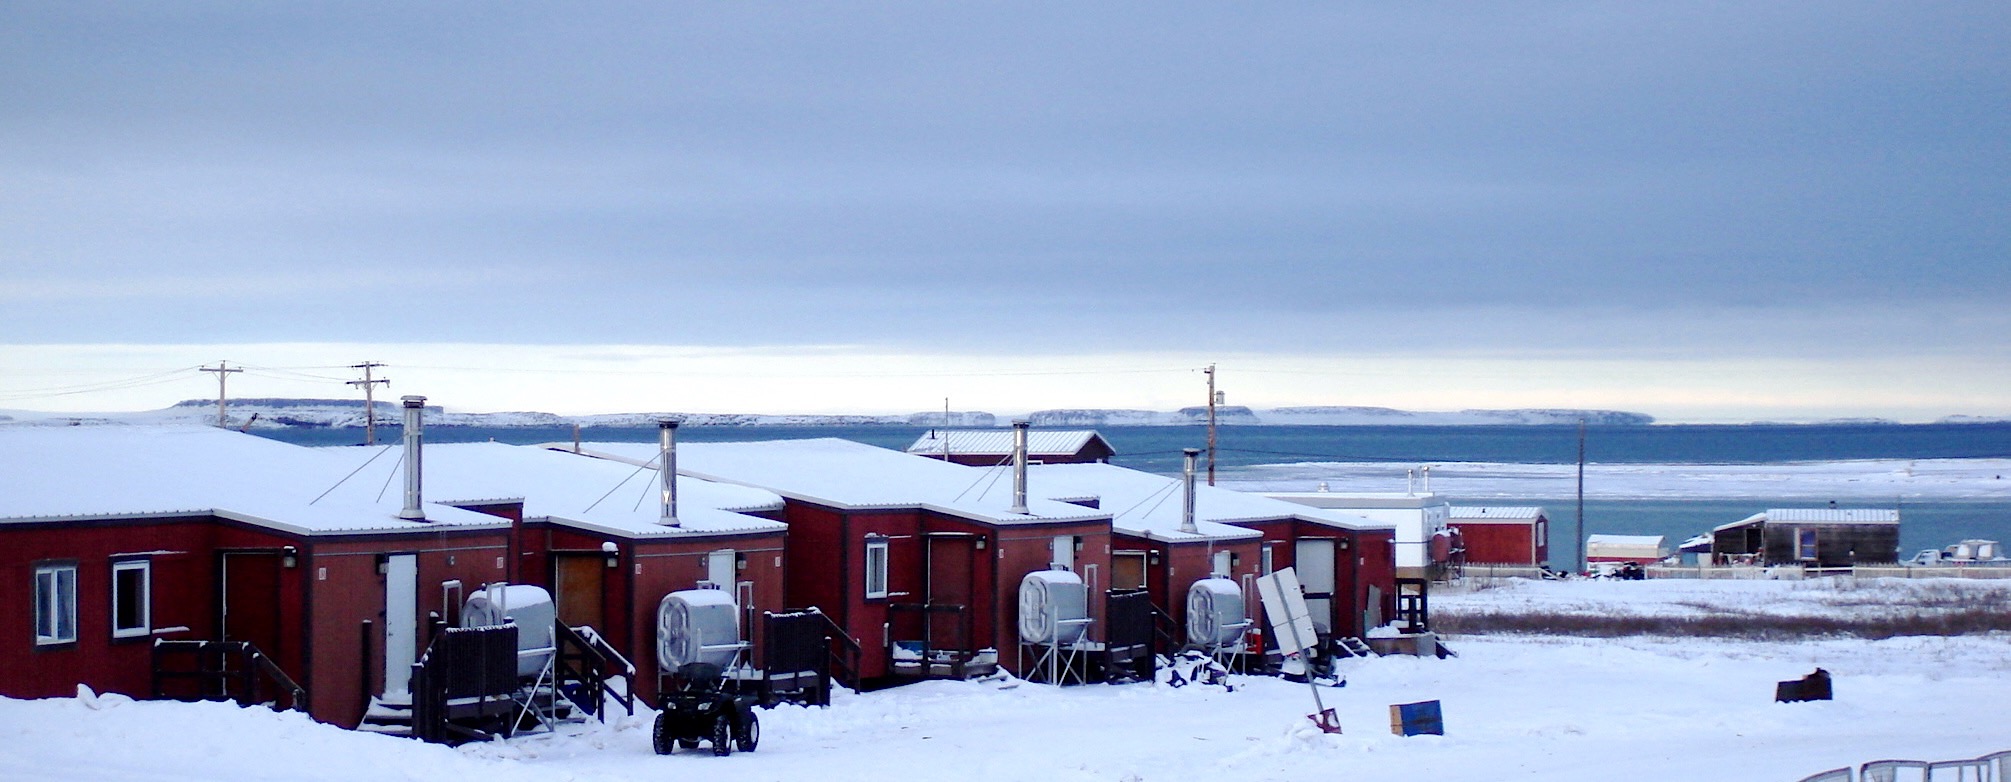 Eligible voters in Kugluktuk will vote next month on whether to abolish the community's alcohol education committee, which has existed since 2007. (PHOTO BY JANE GEORGE)